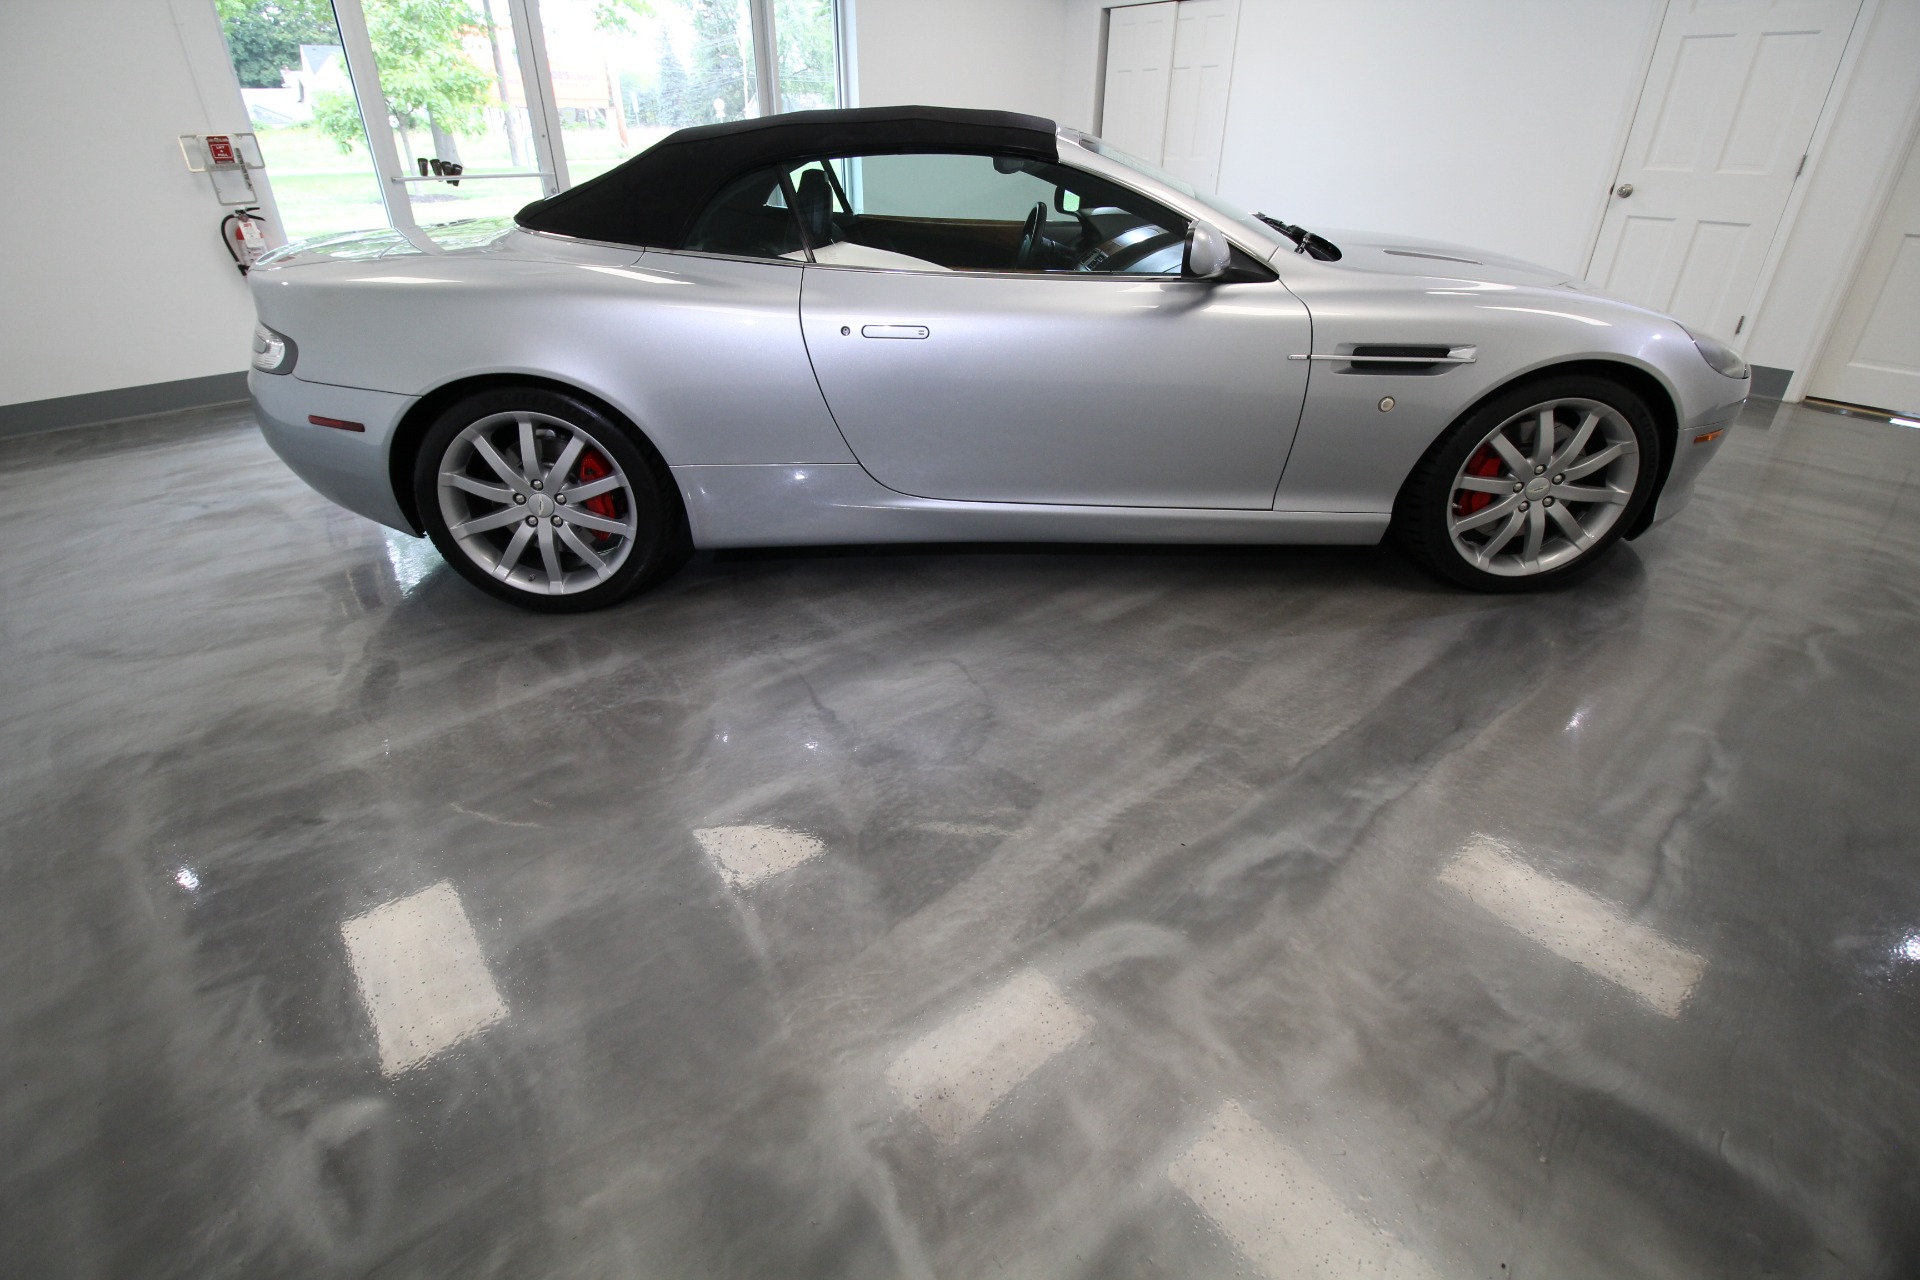 Used 2006 Silver Aston Martin DB9 Volante SUPERB CONDITION INSIDE AND OUT AND MECHANICALLY | Albany, NY